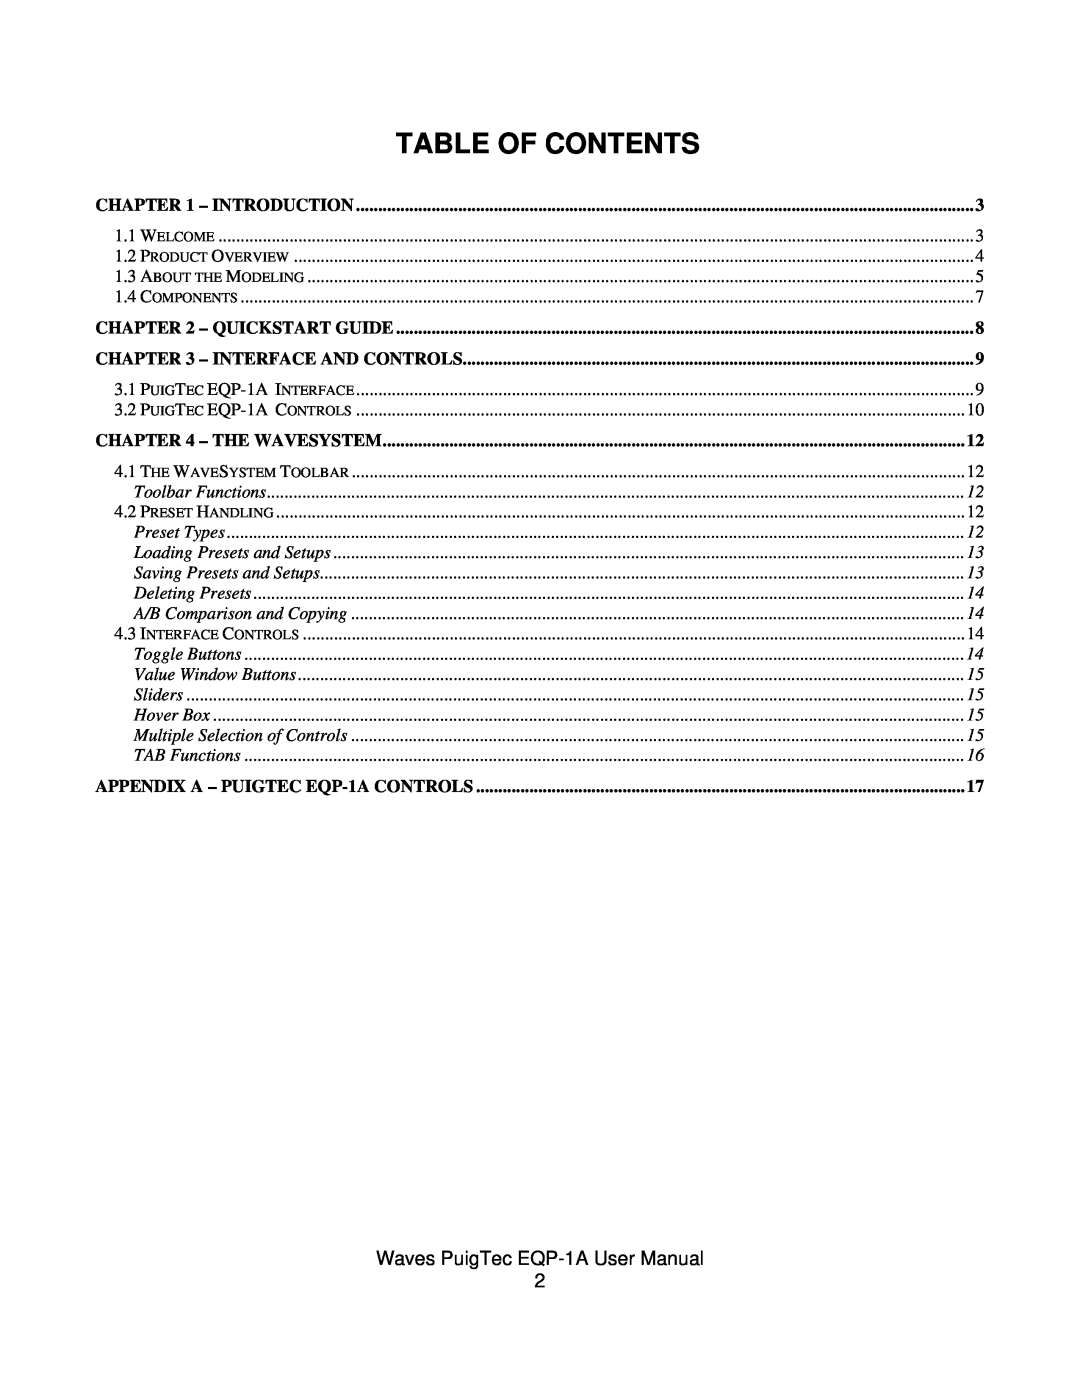 Waves EQP-1A user manual Table Of Contents 